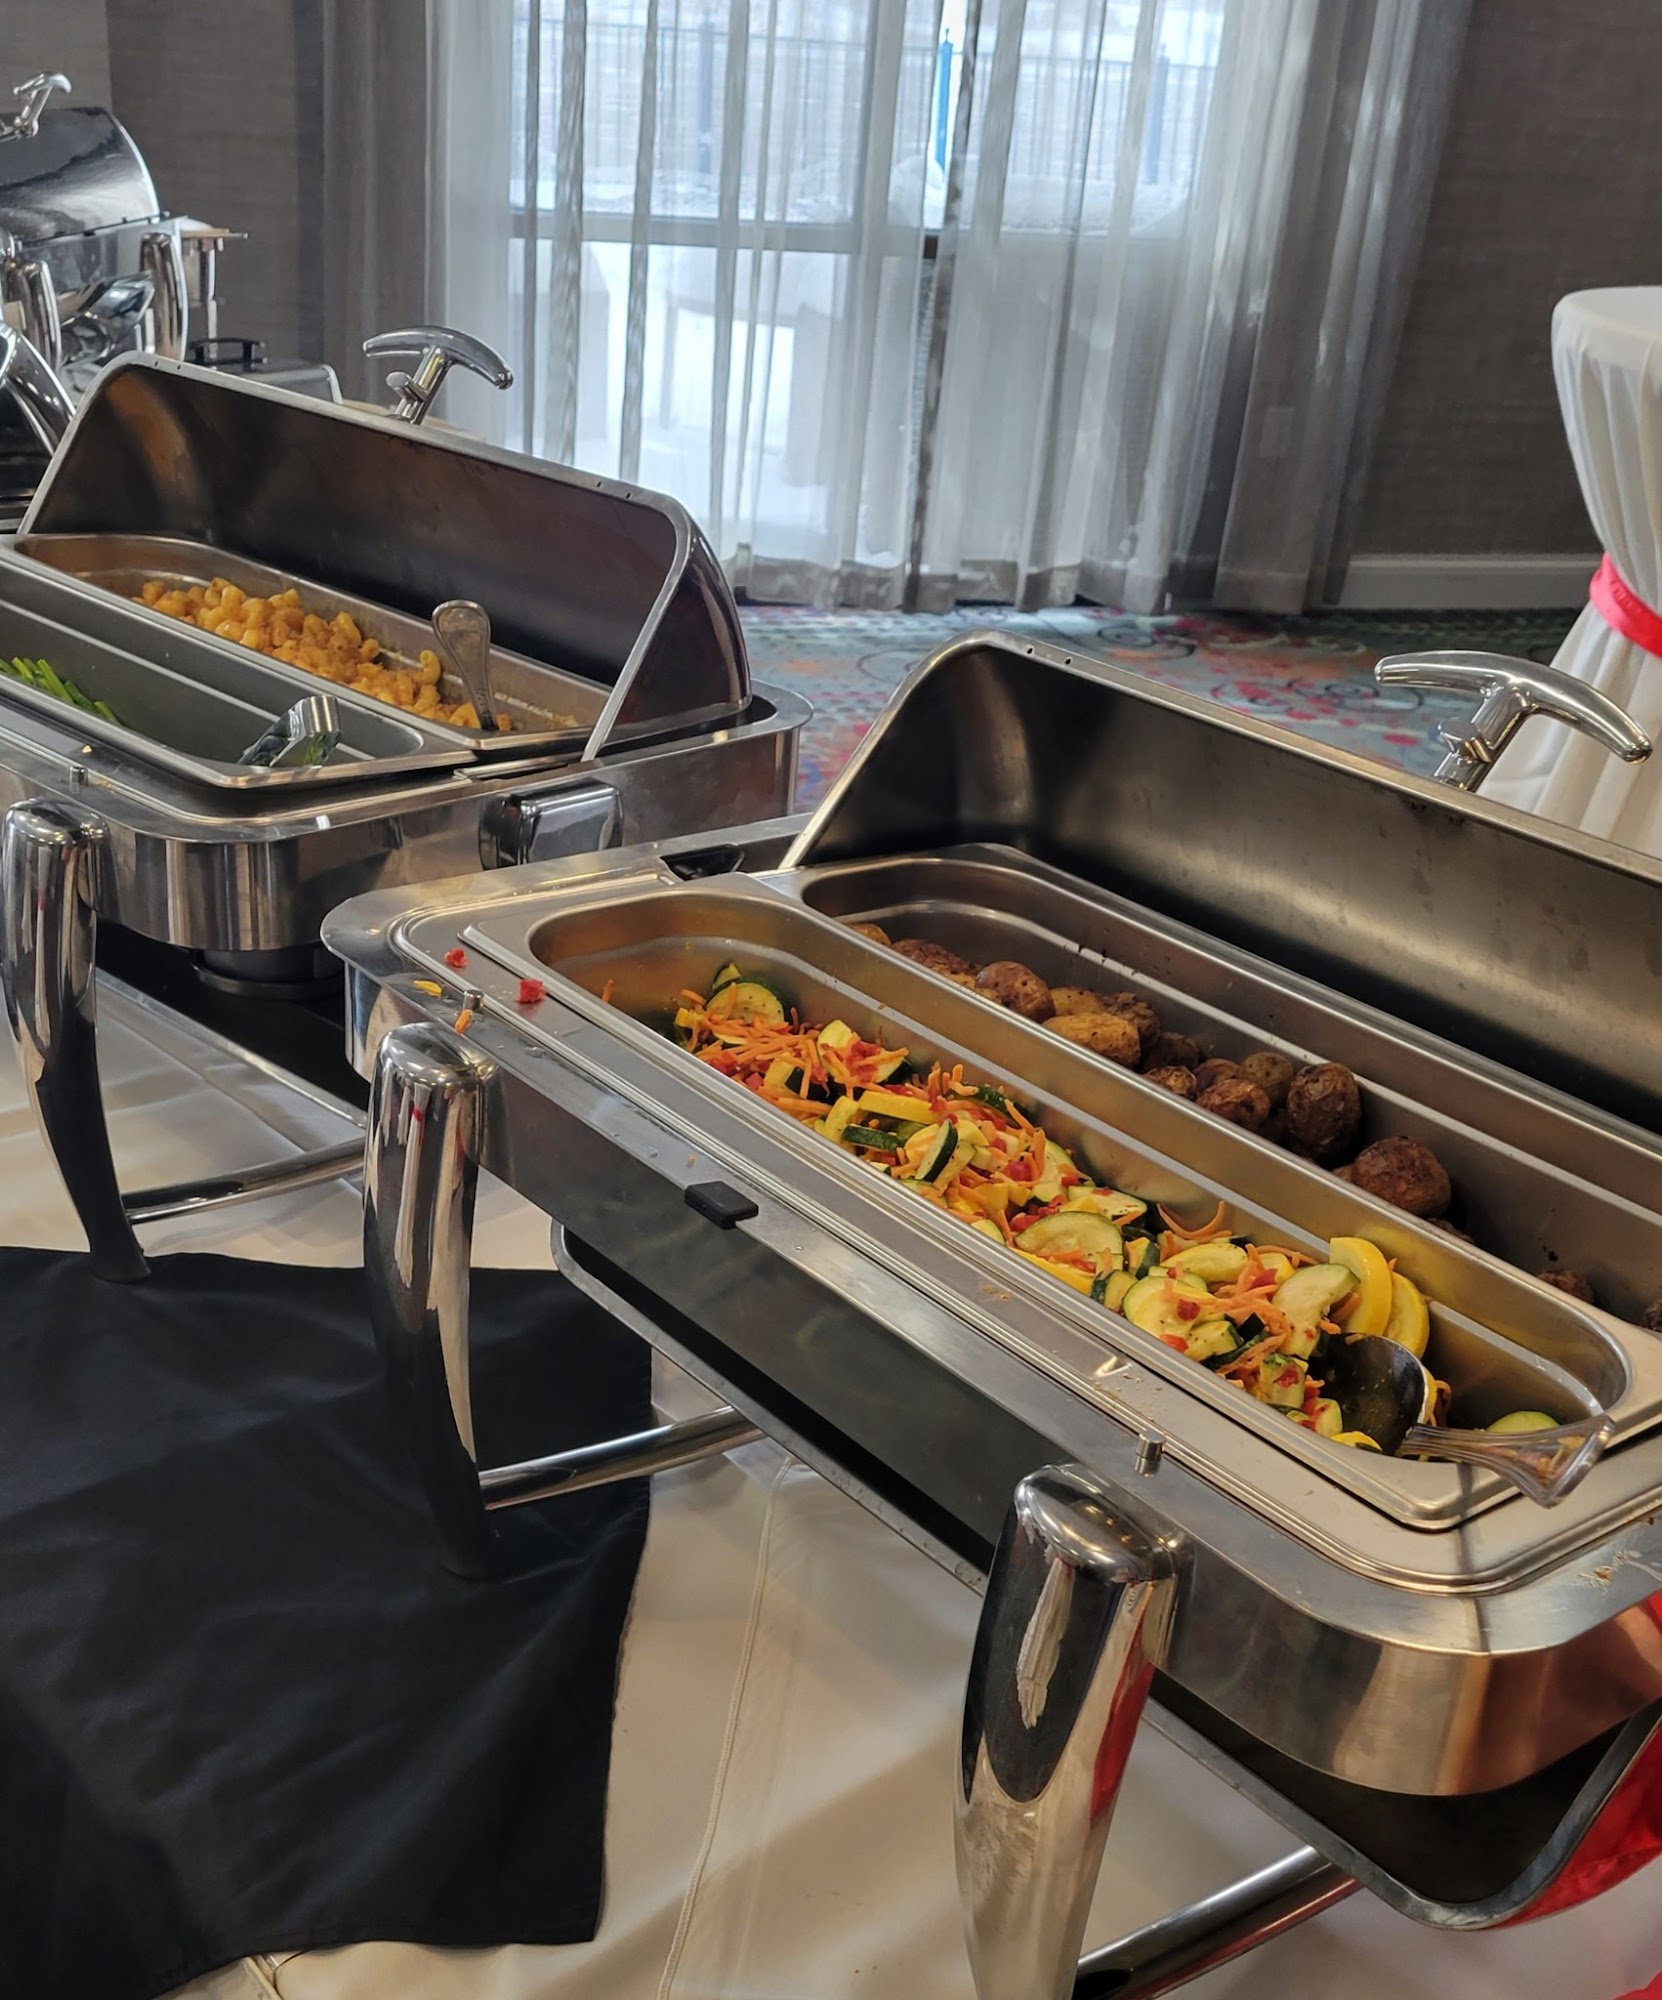 Main Event Catering - Council Bluffs